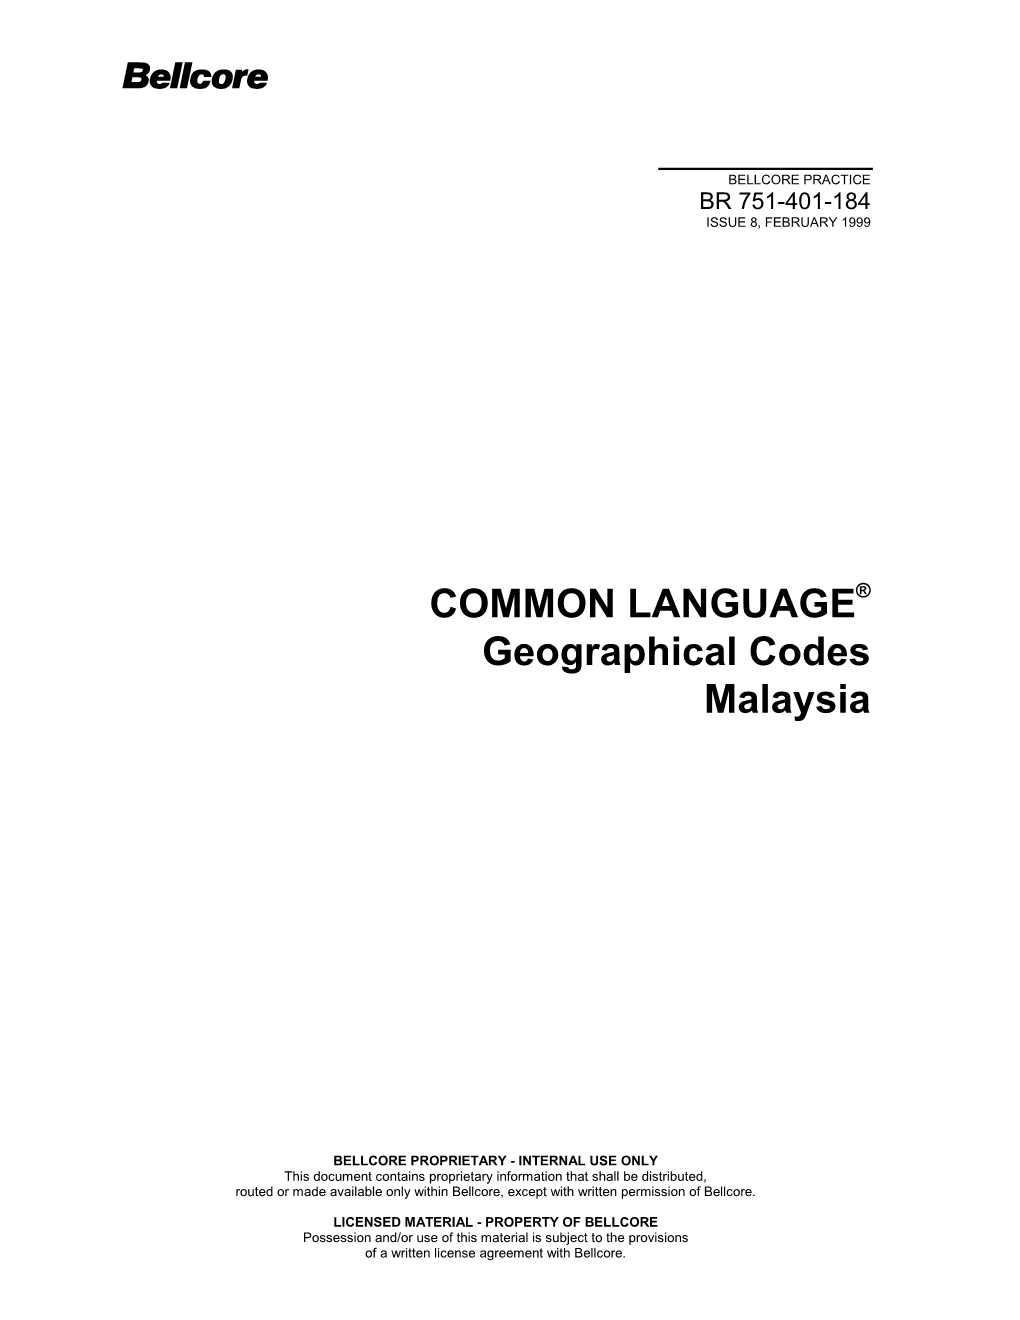 Geographical Codes Malaysia